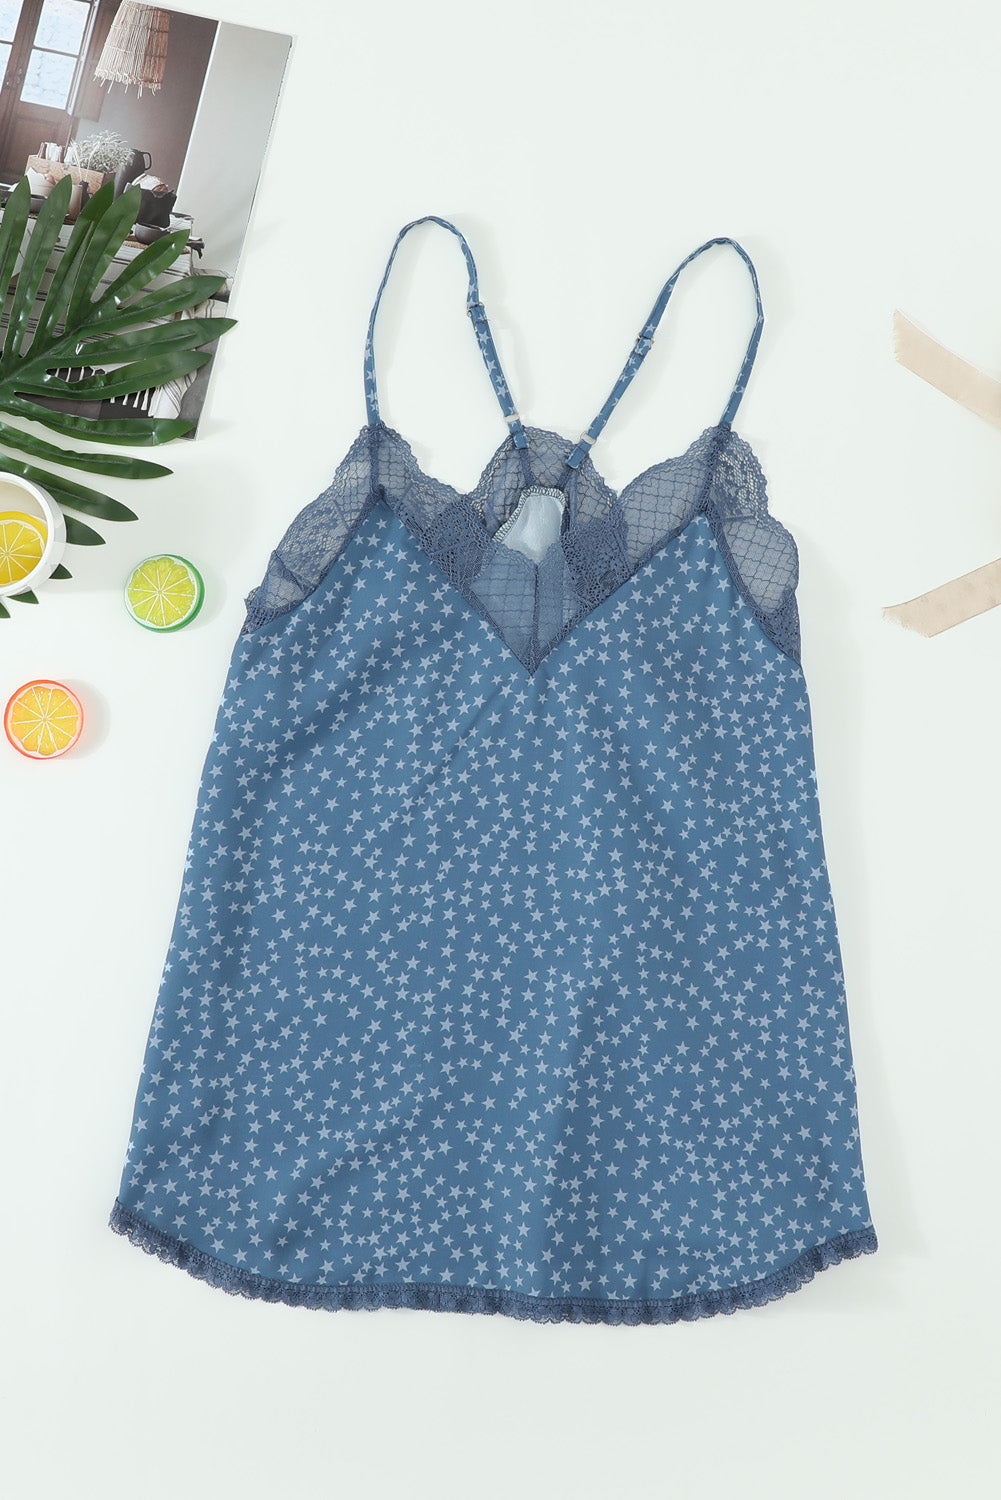 Printed Lace Camisole